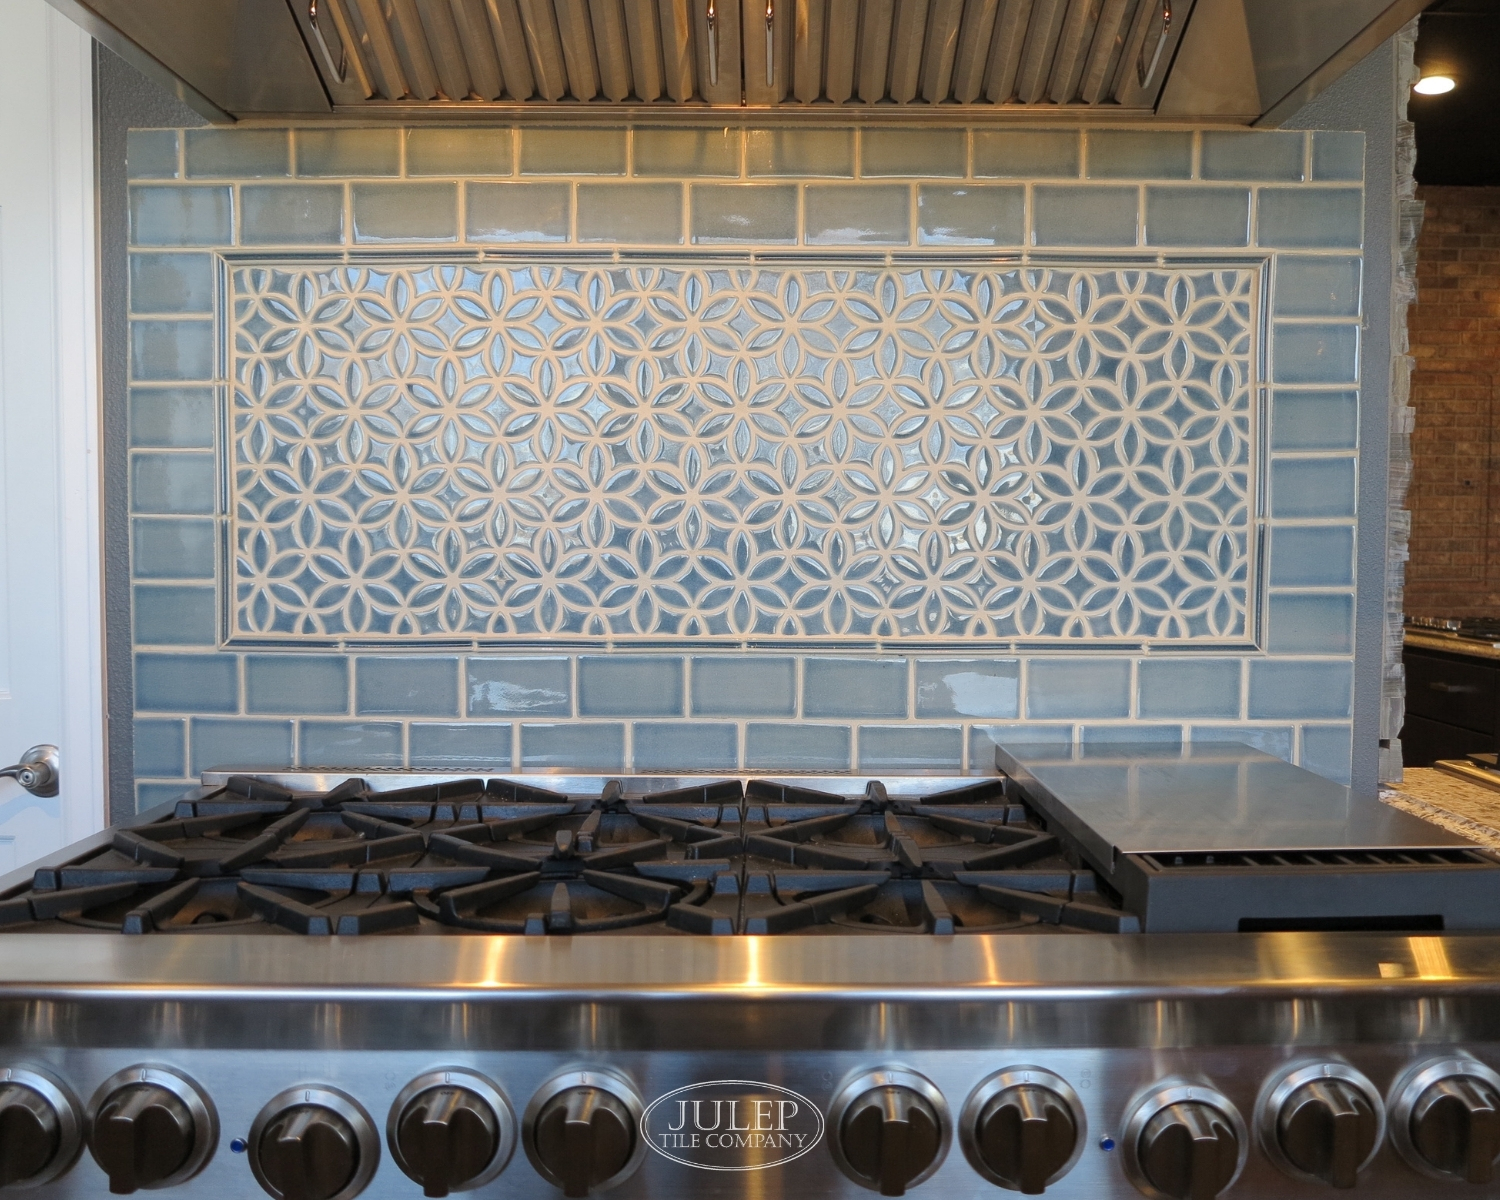 18 Ways To Use Decorative Tile Behind Your Stove   Julep Tile Company